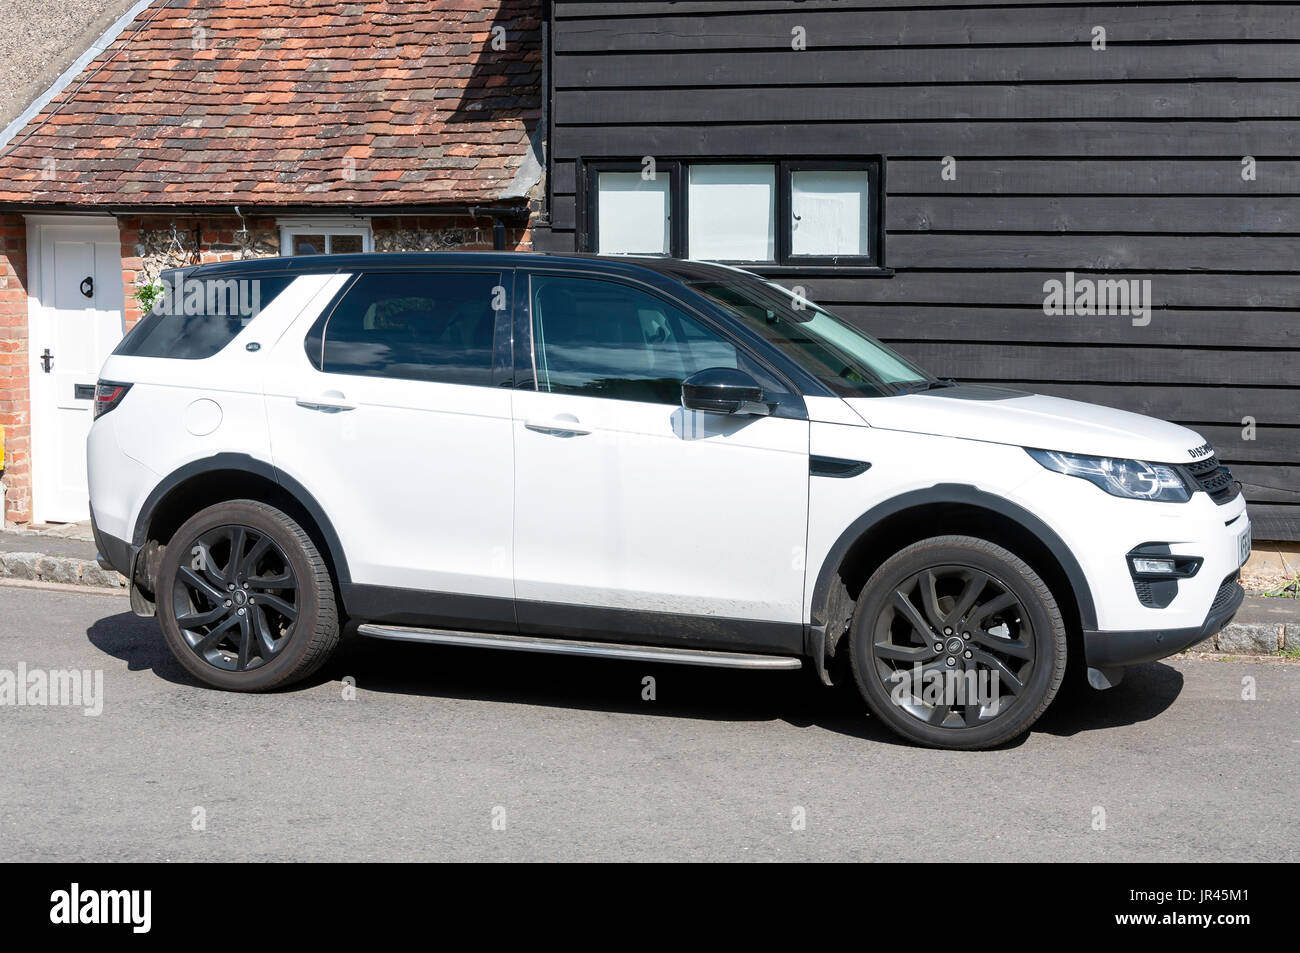 White Range Rover Discovery Sport vehicle, Highmore Cottages, Little Missenden, Buckinghamshire, England, United Kingdom Stock Photo